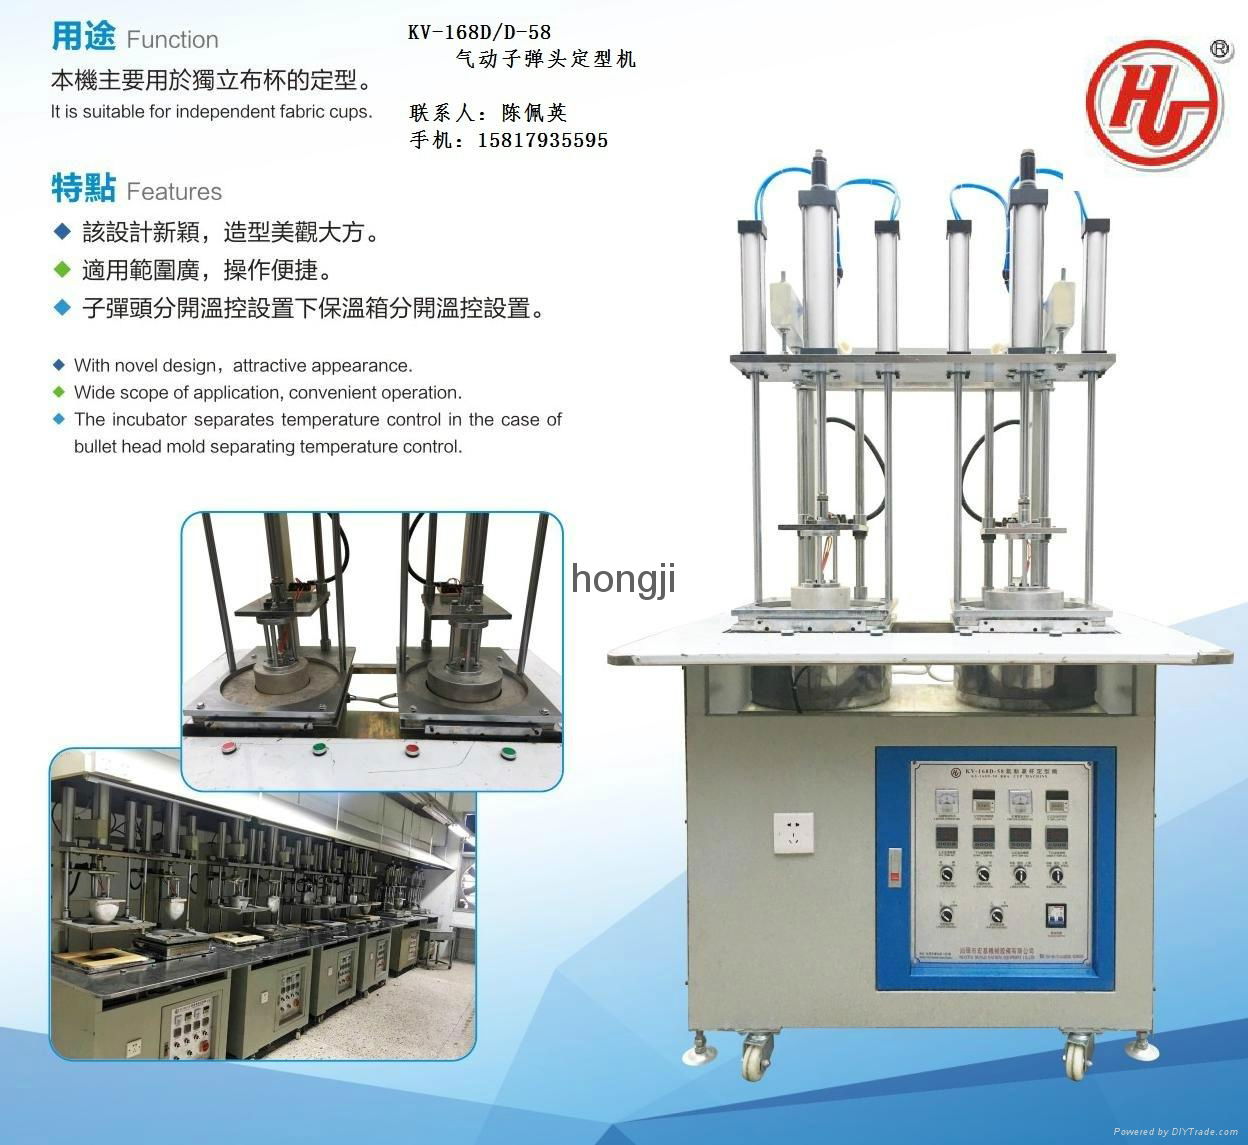 Fabric Bra Cup Molding Machine at Best Price in Shantou